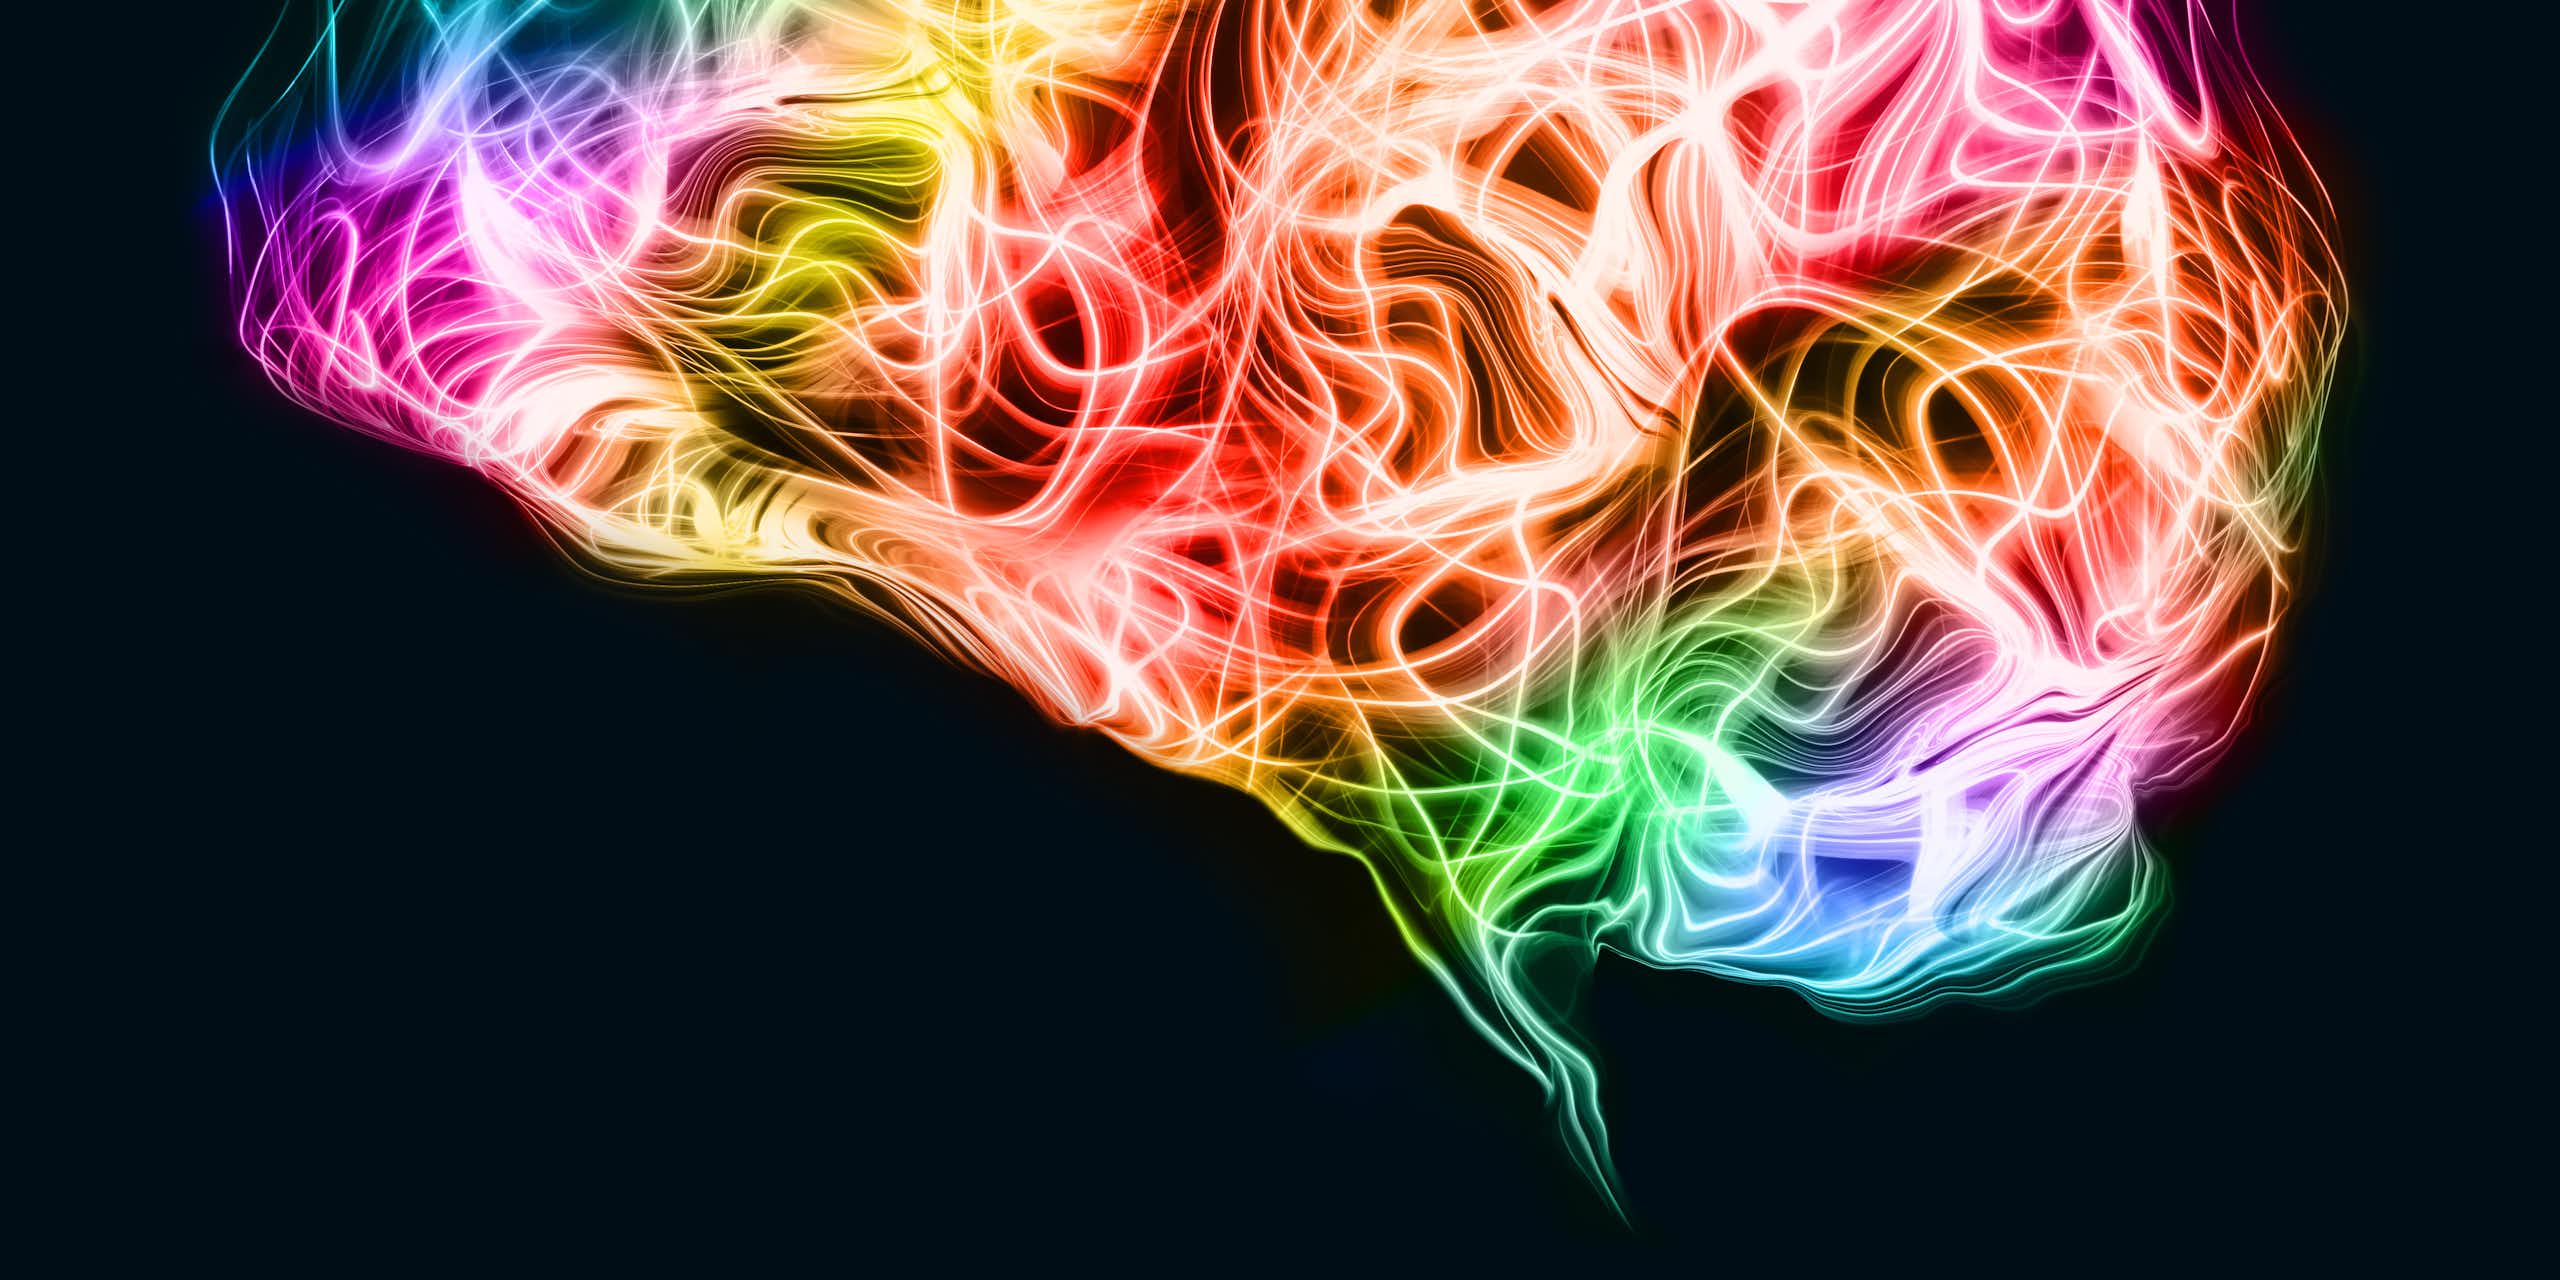 Colorful brain waves on black background